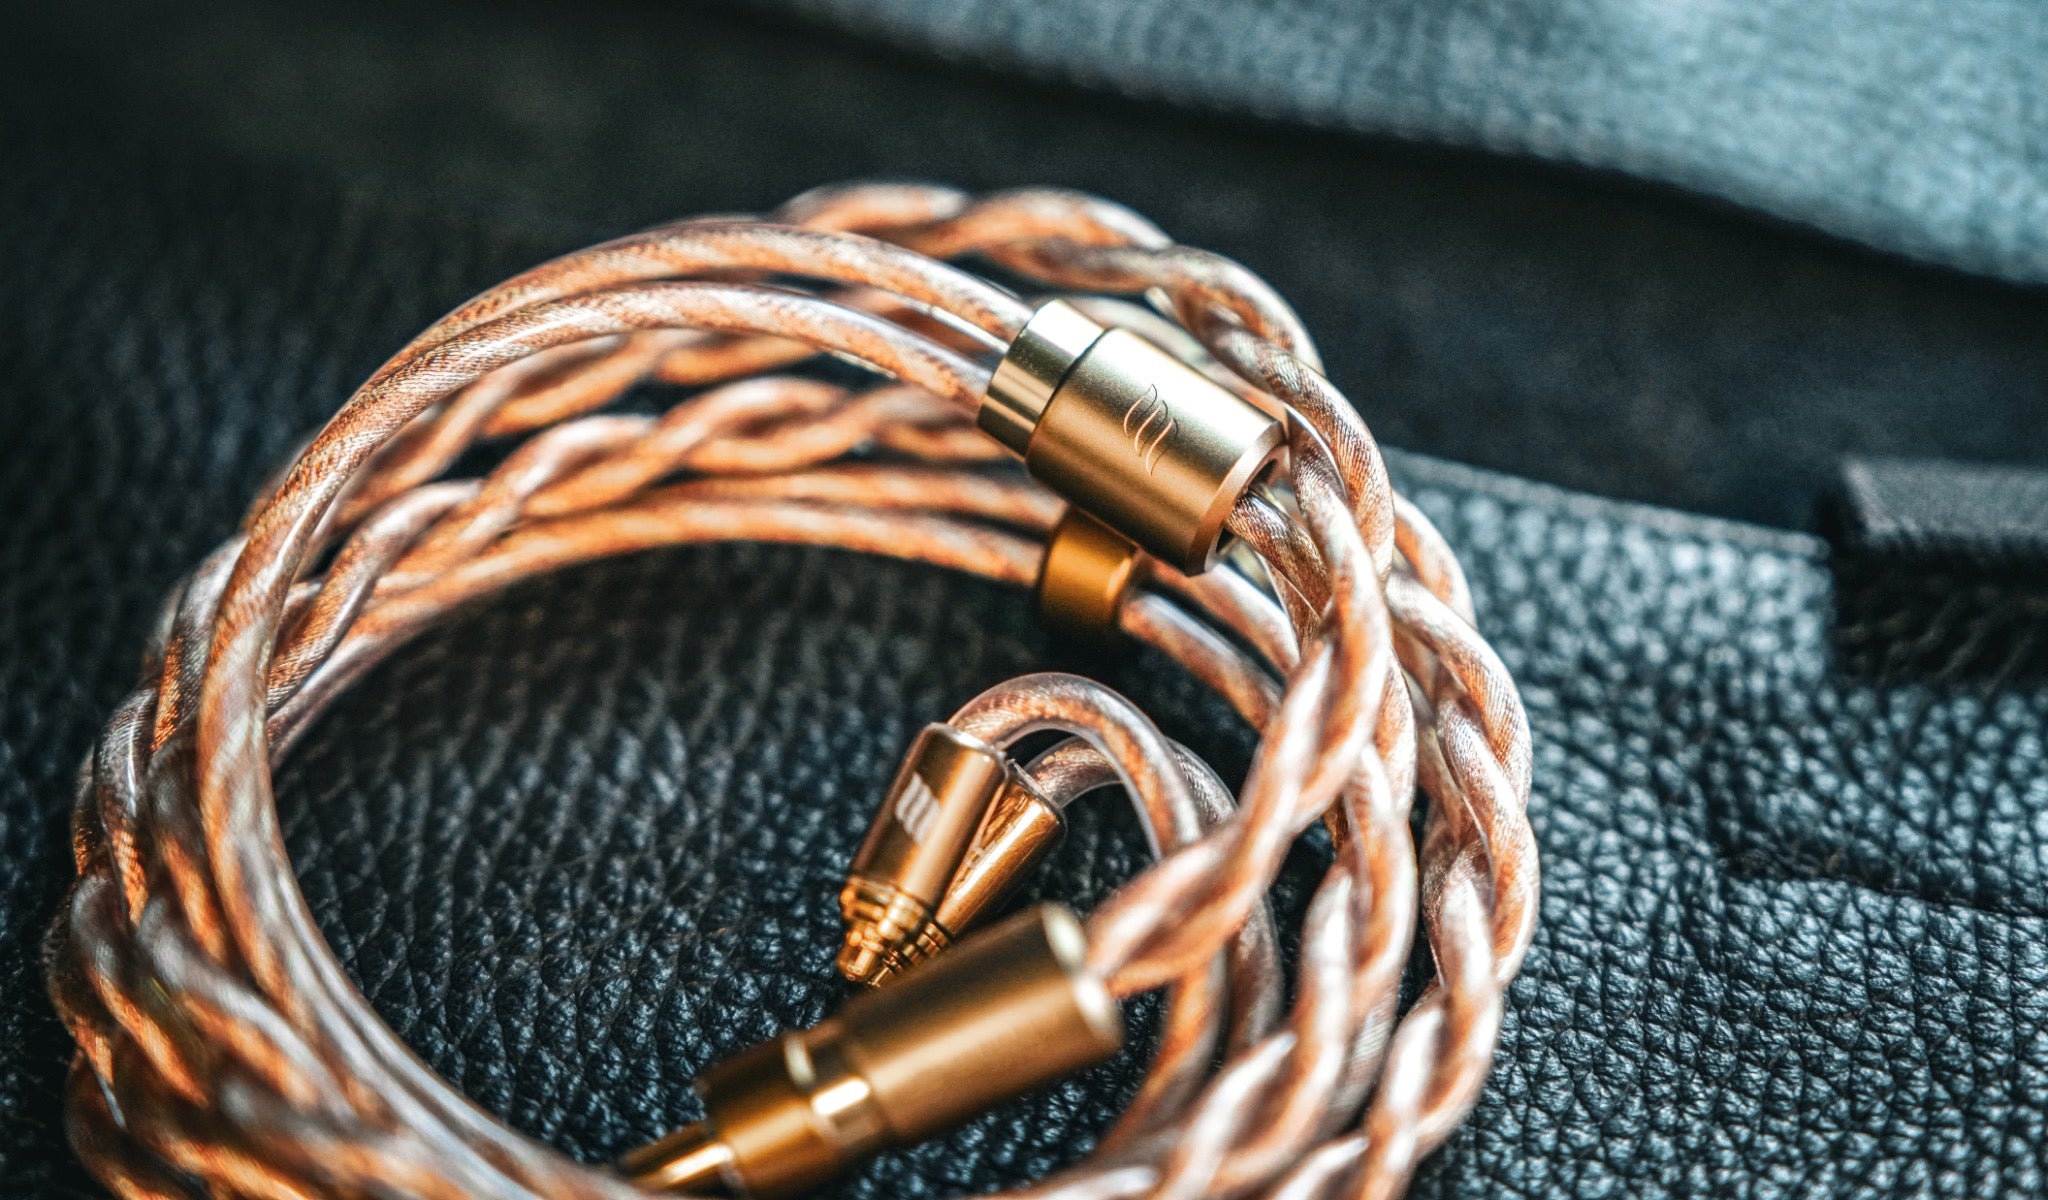 Effect Audio Fusion 1 coiled over dark sea foam leather pouch from Bloom Audio gallery